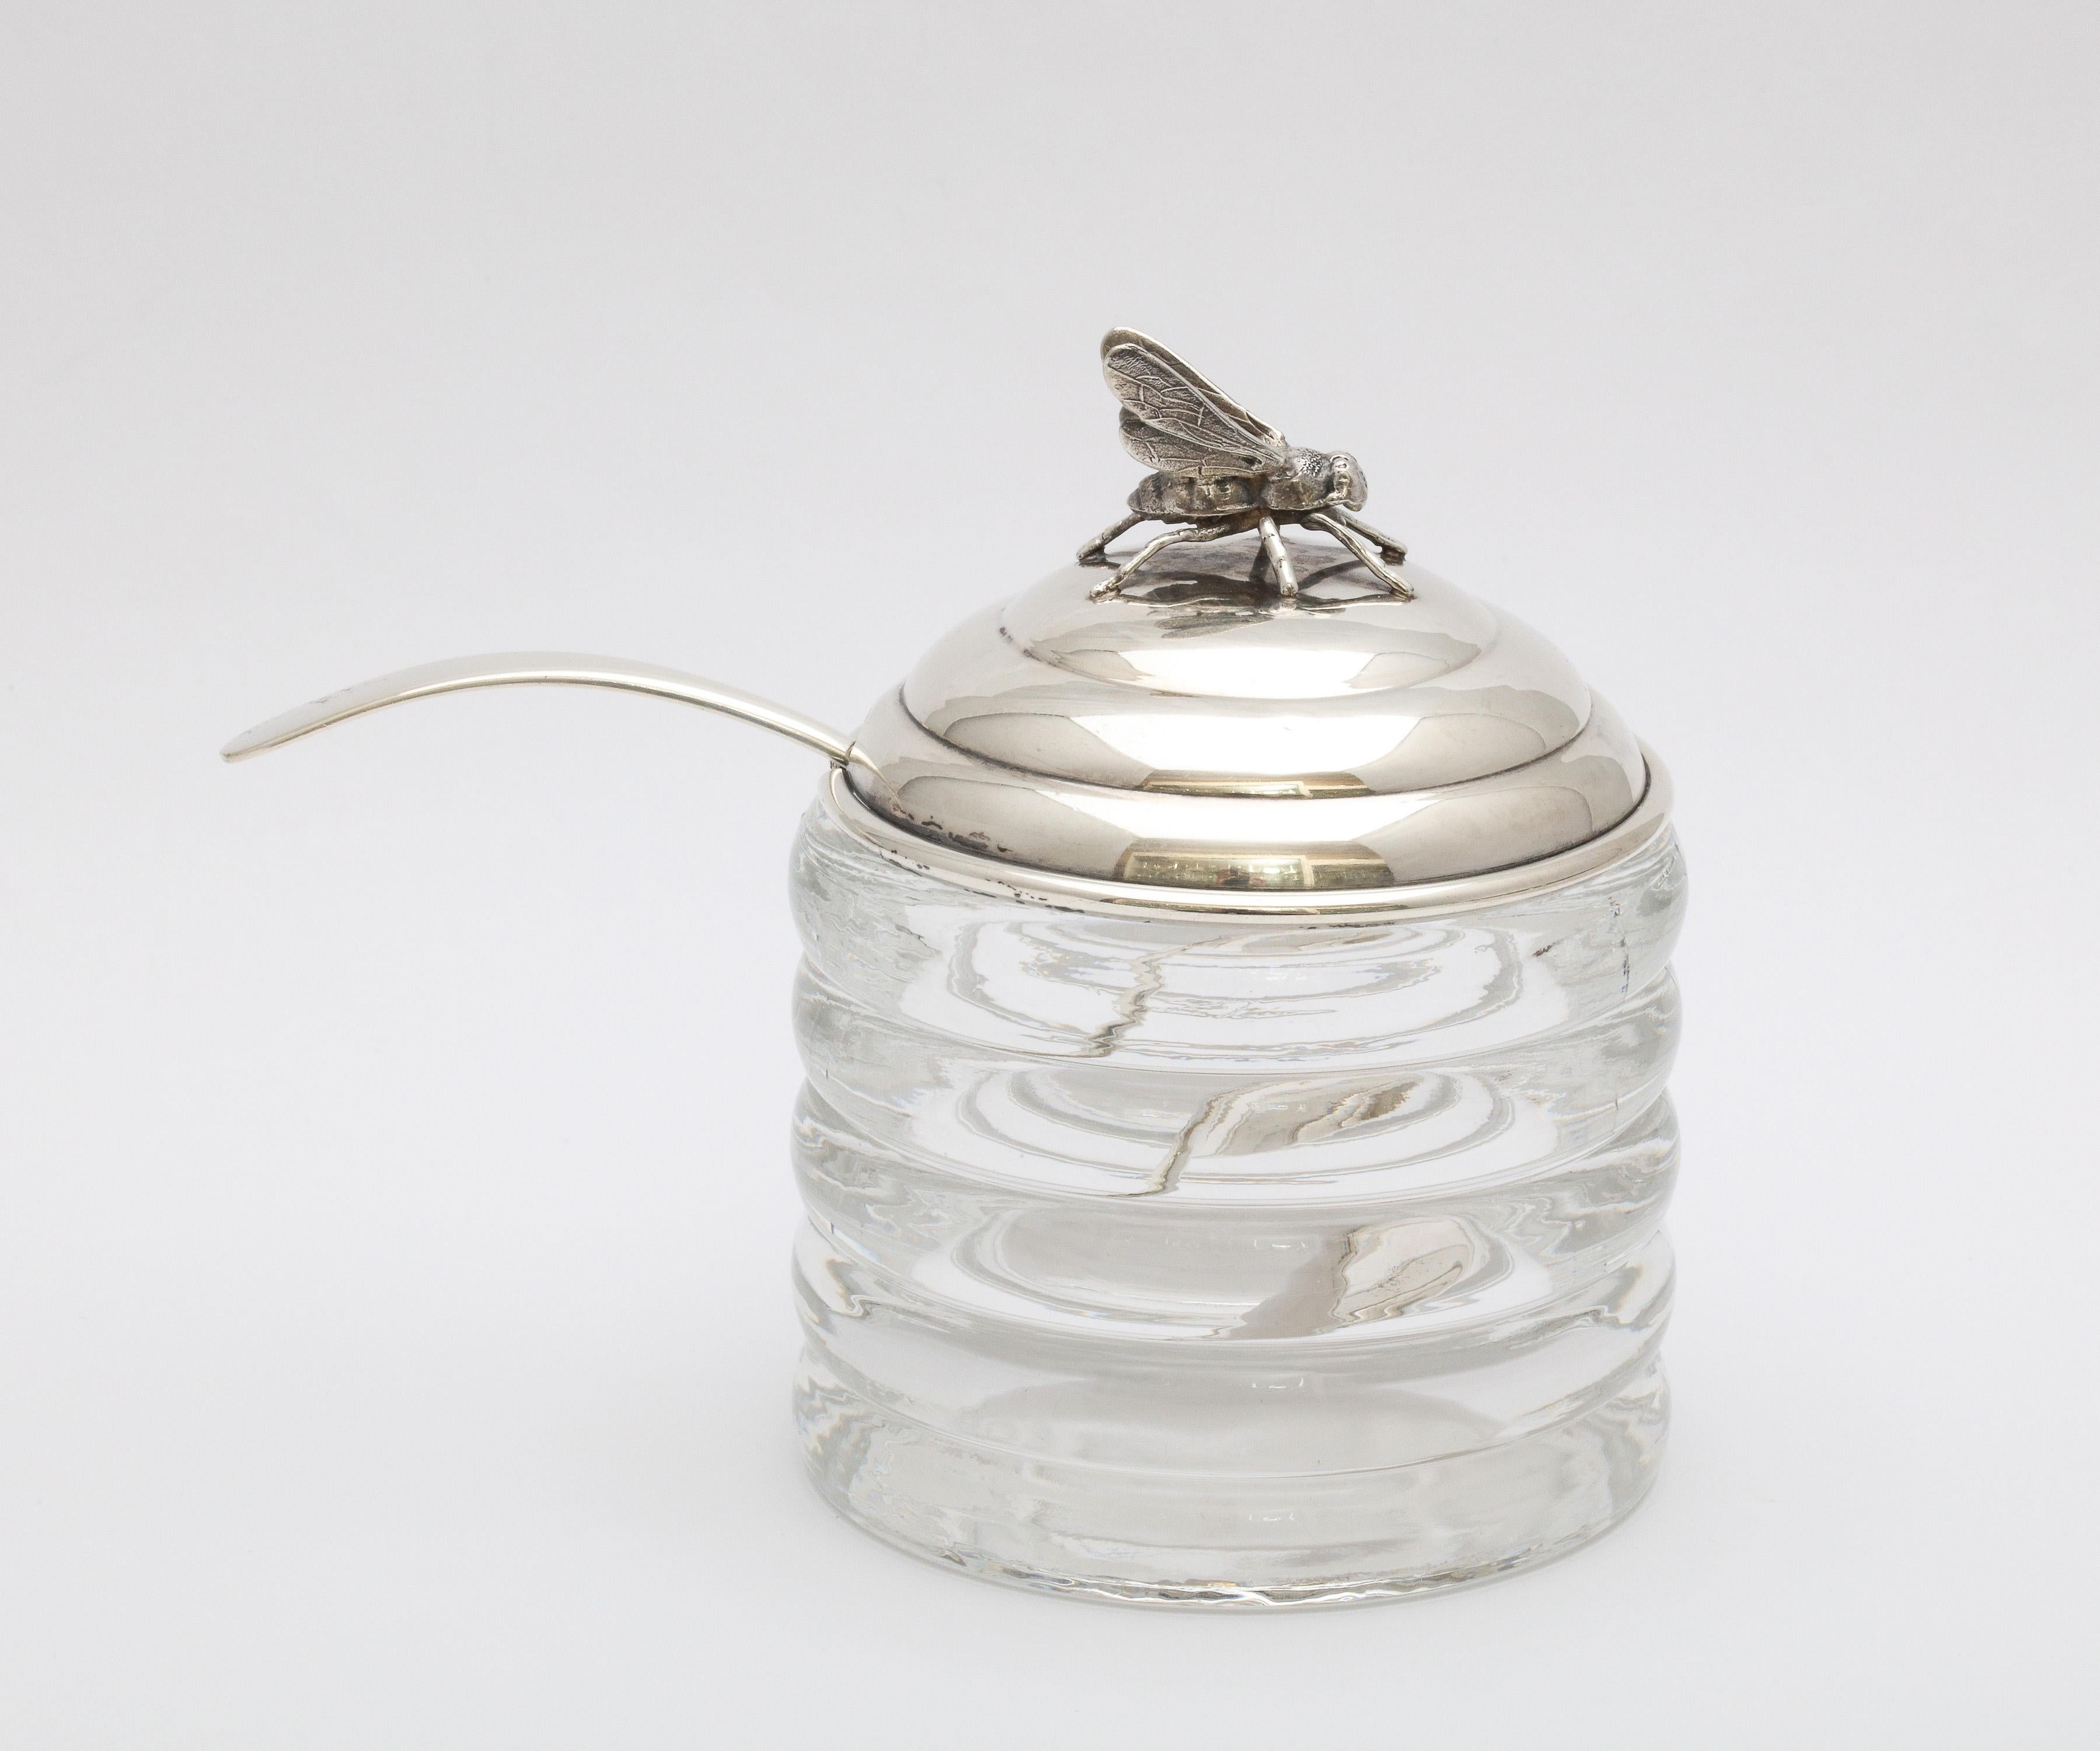 American Art Deco Period Sterling Silver-Mounted Beehive-Form Honey Jar With Spoon